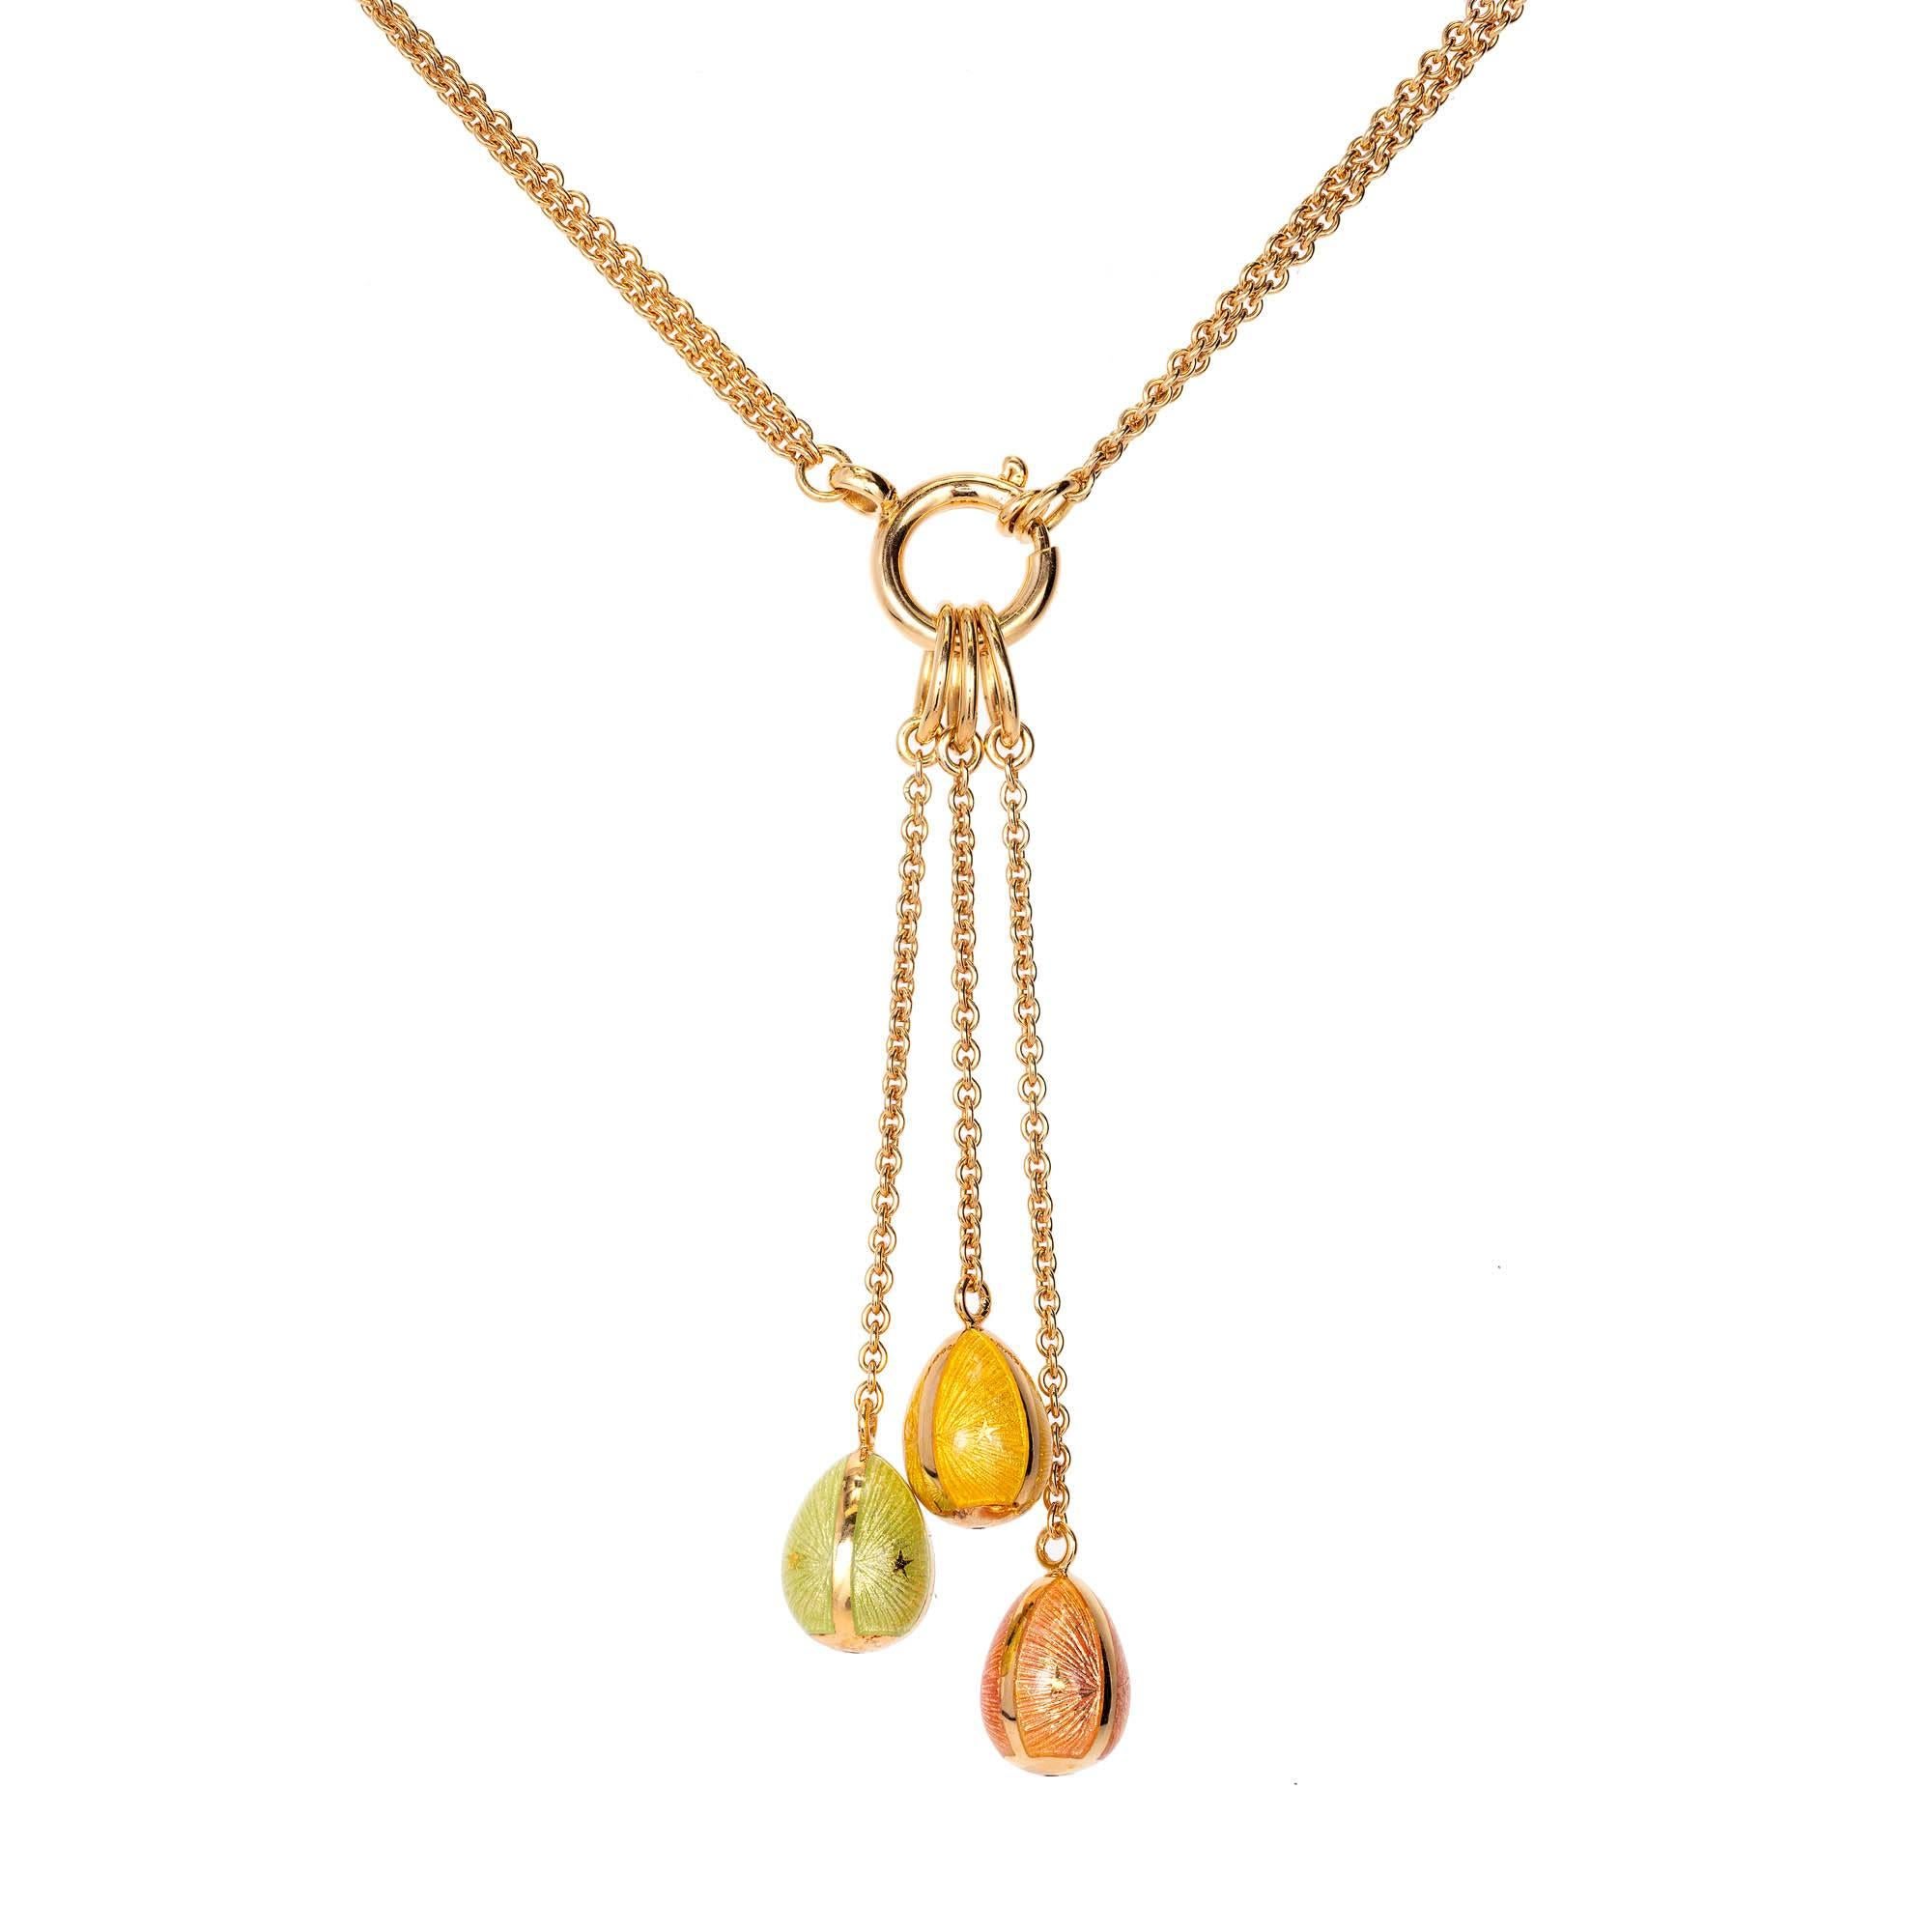 Modern Made In Germany Faberge Three-Color Egg Enamel Gold Pendant Necklace